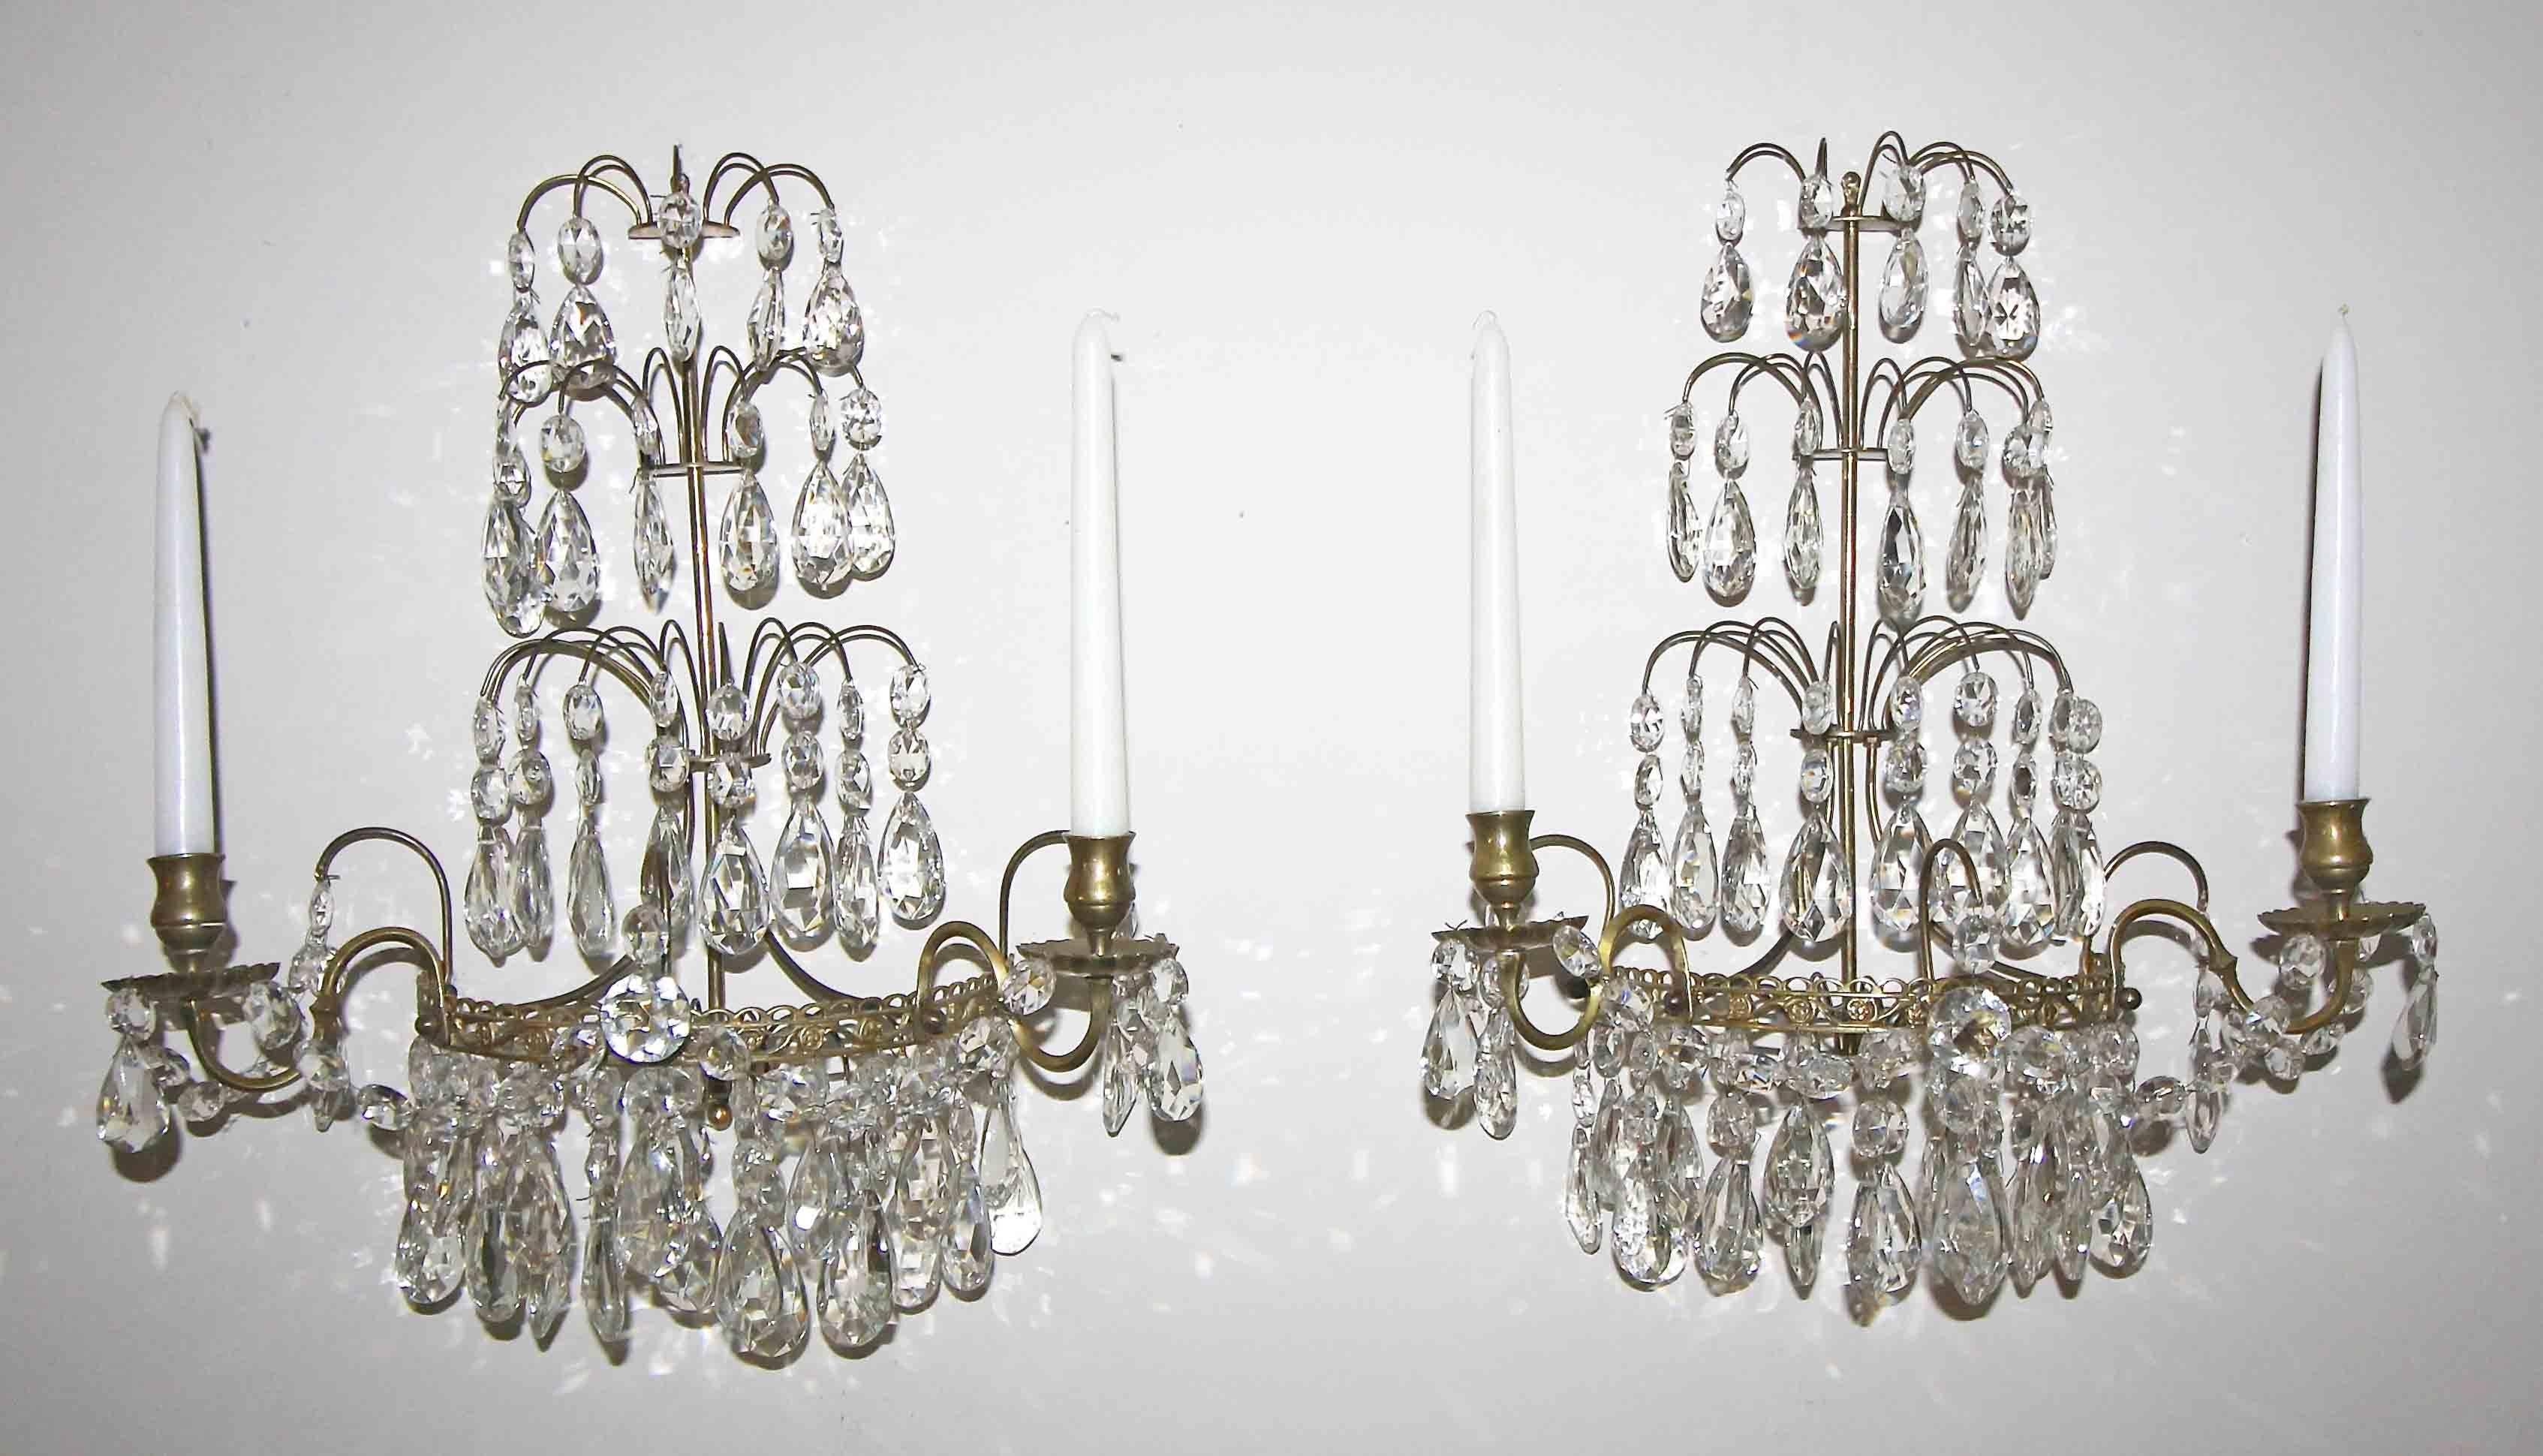 Pair of Swedish Gustavian Style Crystal and Brass Candle Wall Sconces For Sale 5